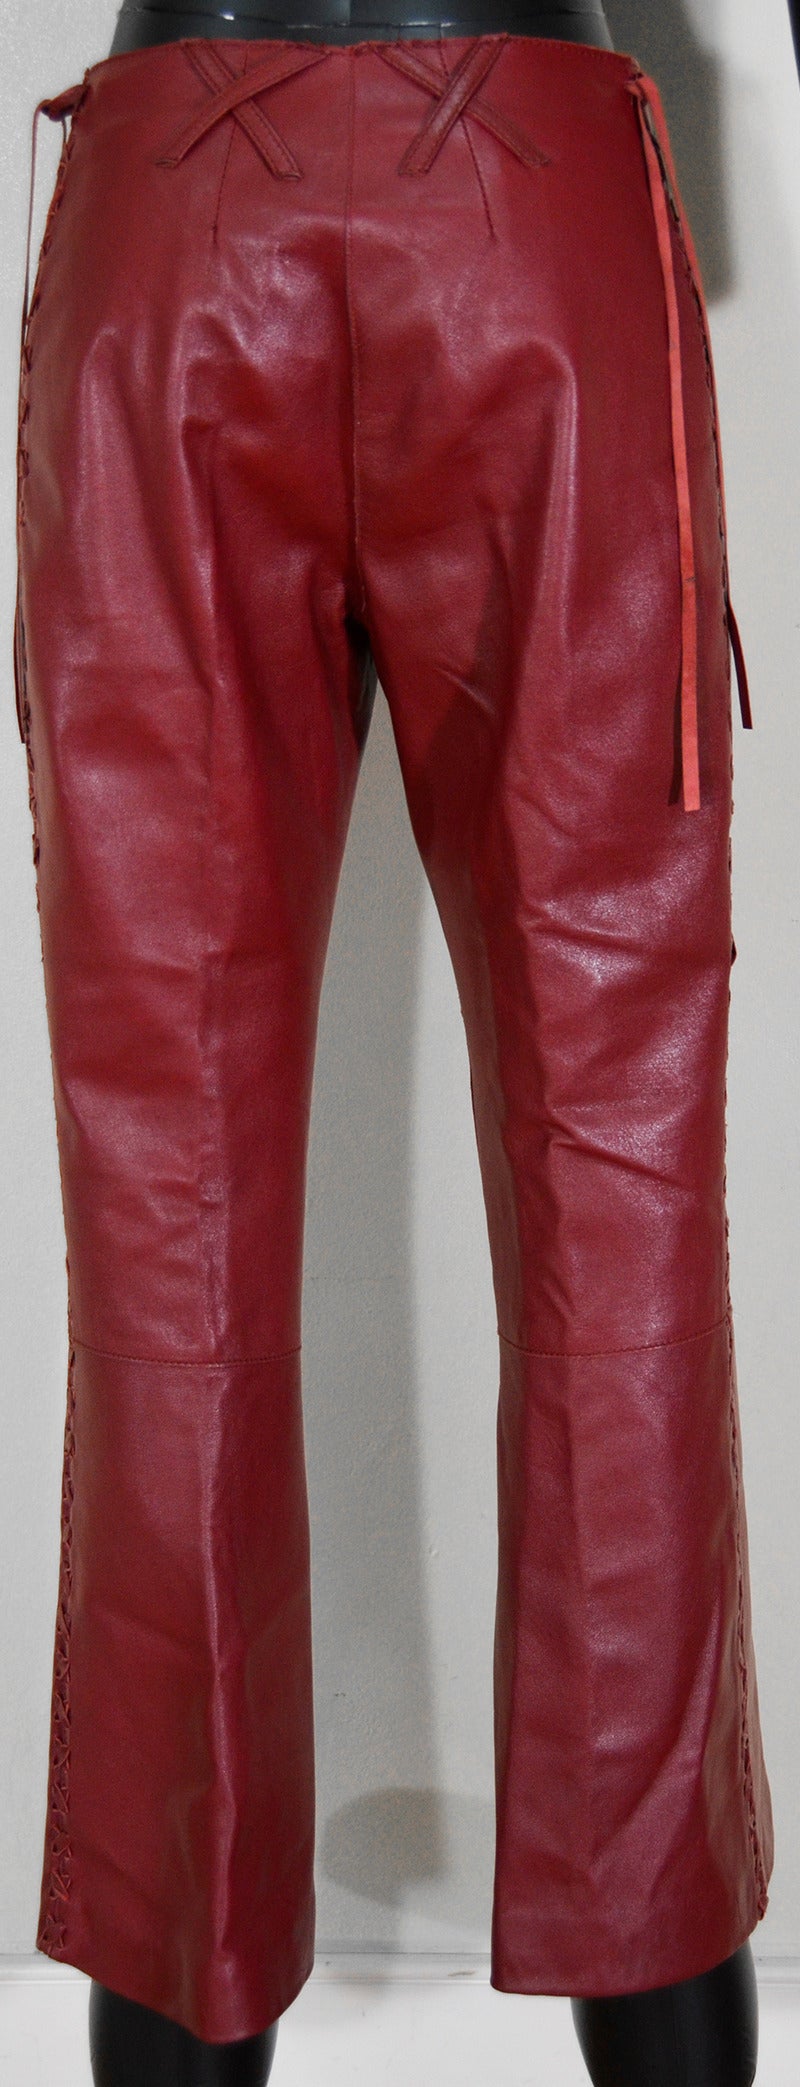 Dolce and Gabbana red leather pants, animal print lining...iconic...size 6...excellent condition.